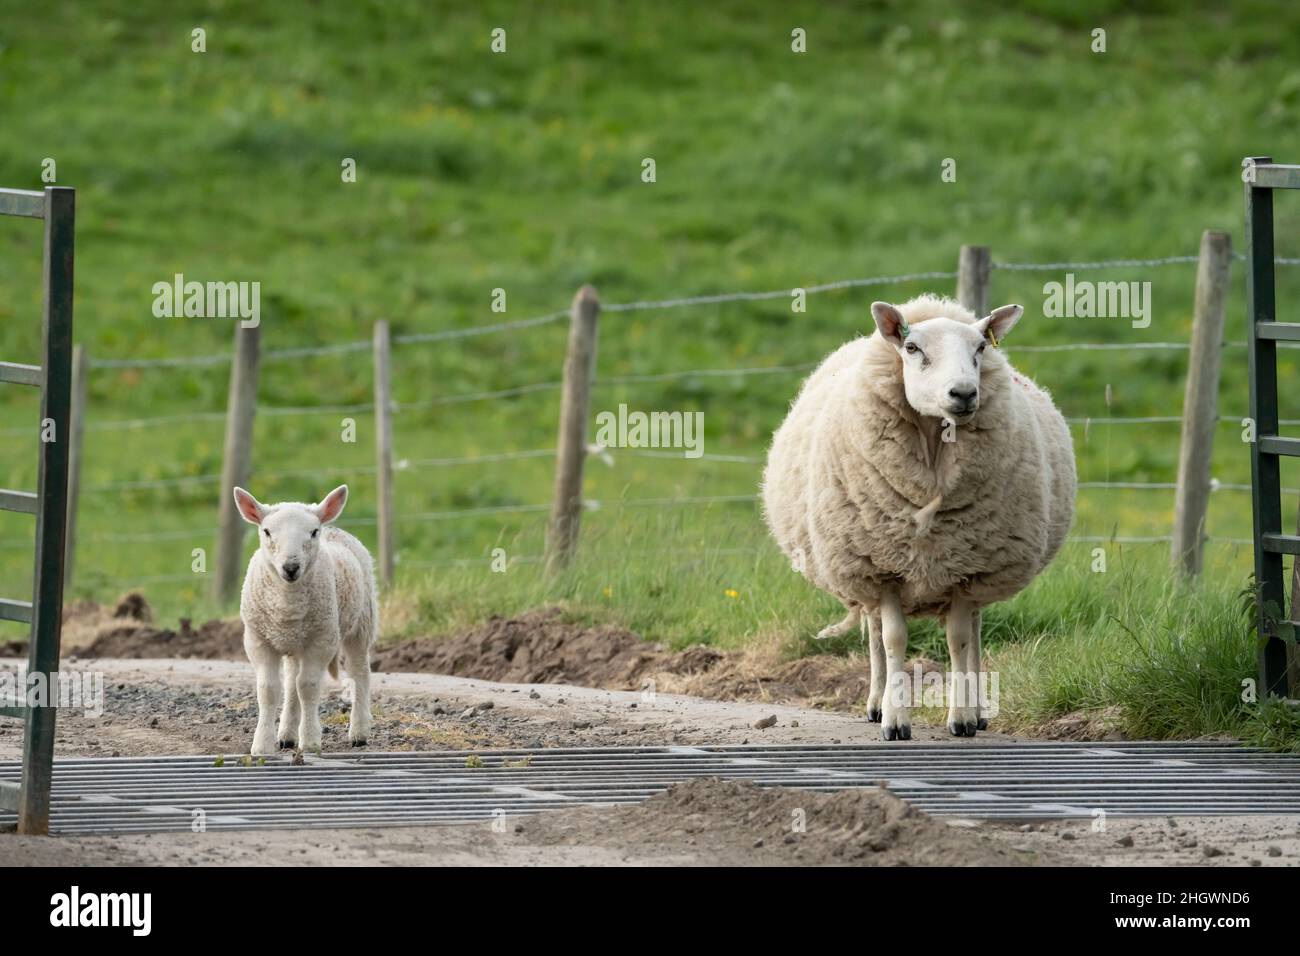 Hethpool, near Wooler, Northumberland - College Valley, Cheviot foothills. Lambing time in summer, June. Stock Photo